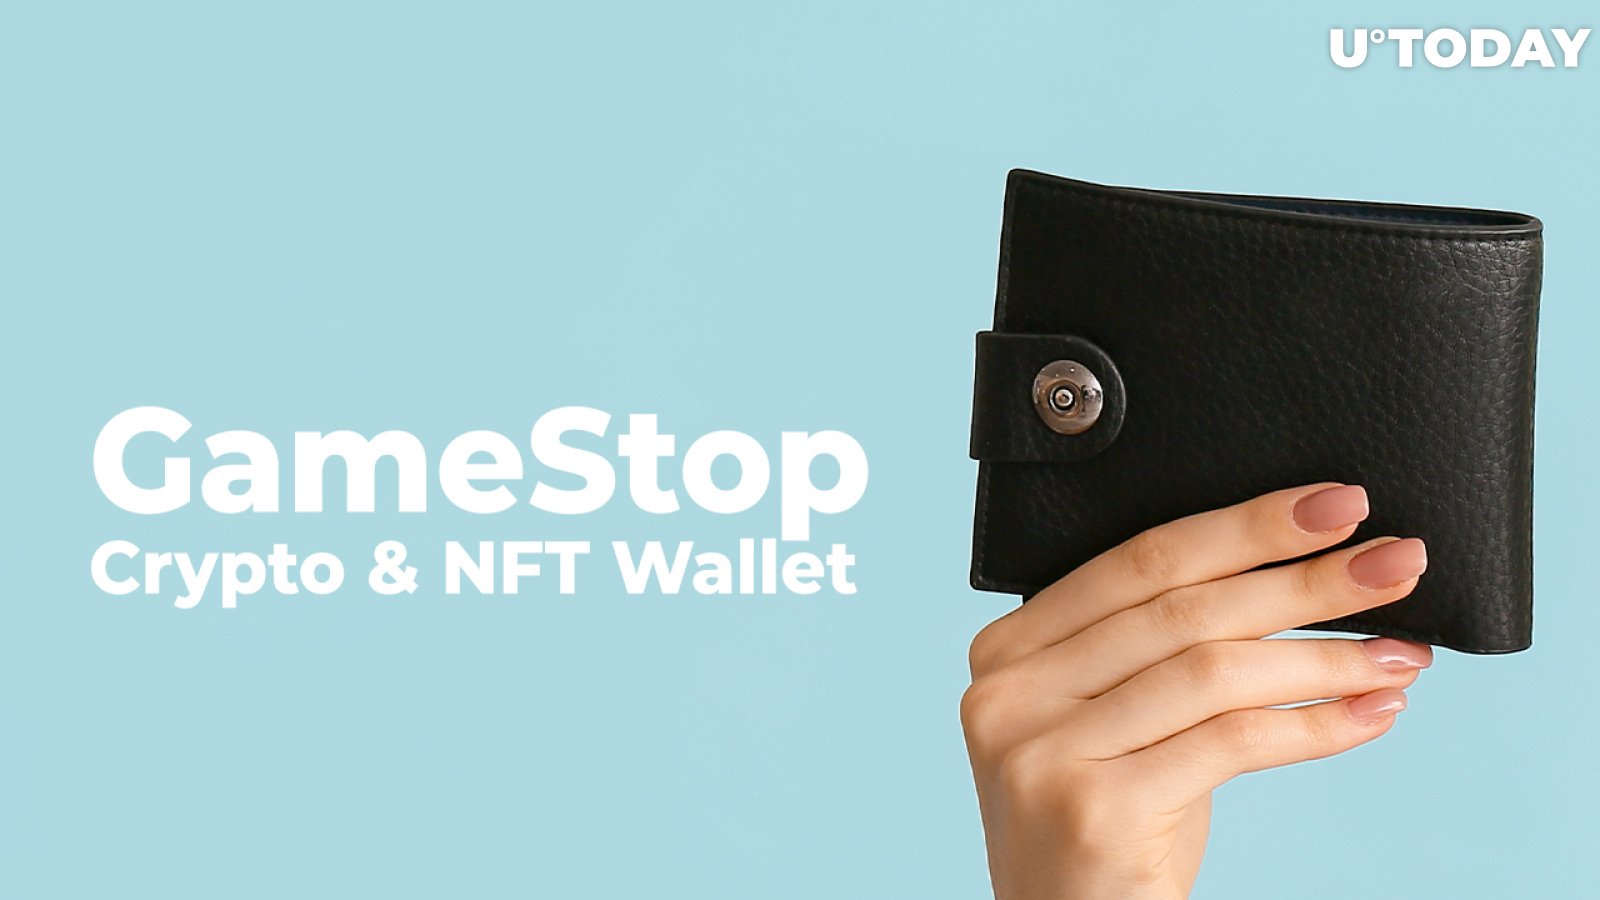 GameStop Finally Launches Its Crypto and NFT Wallet